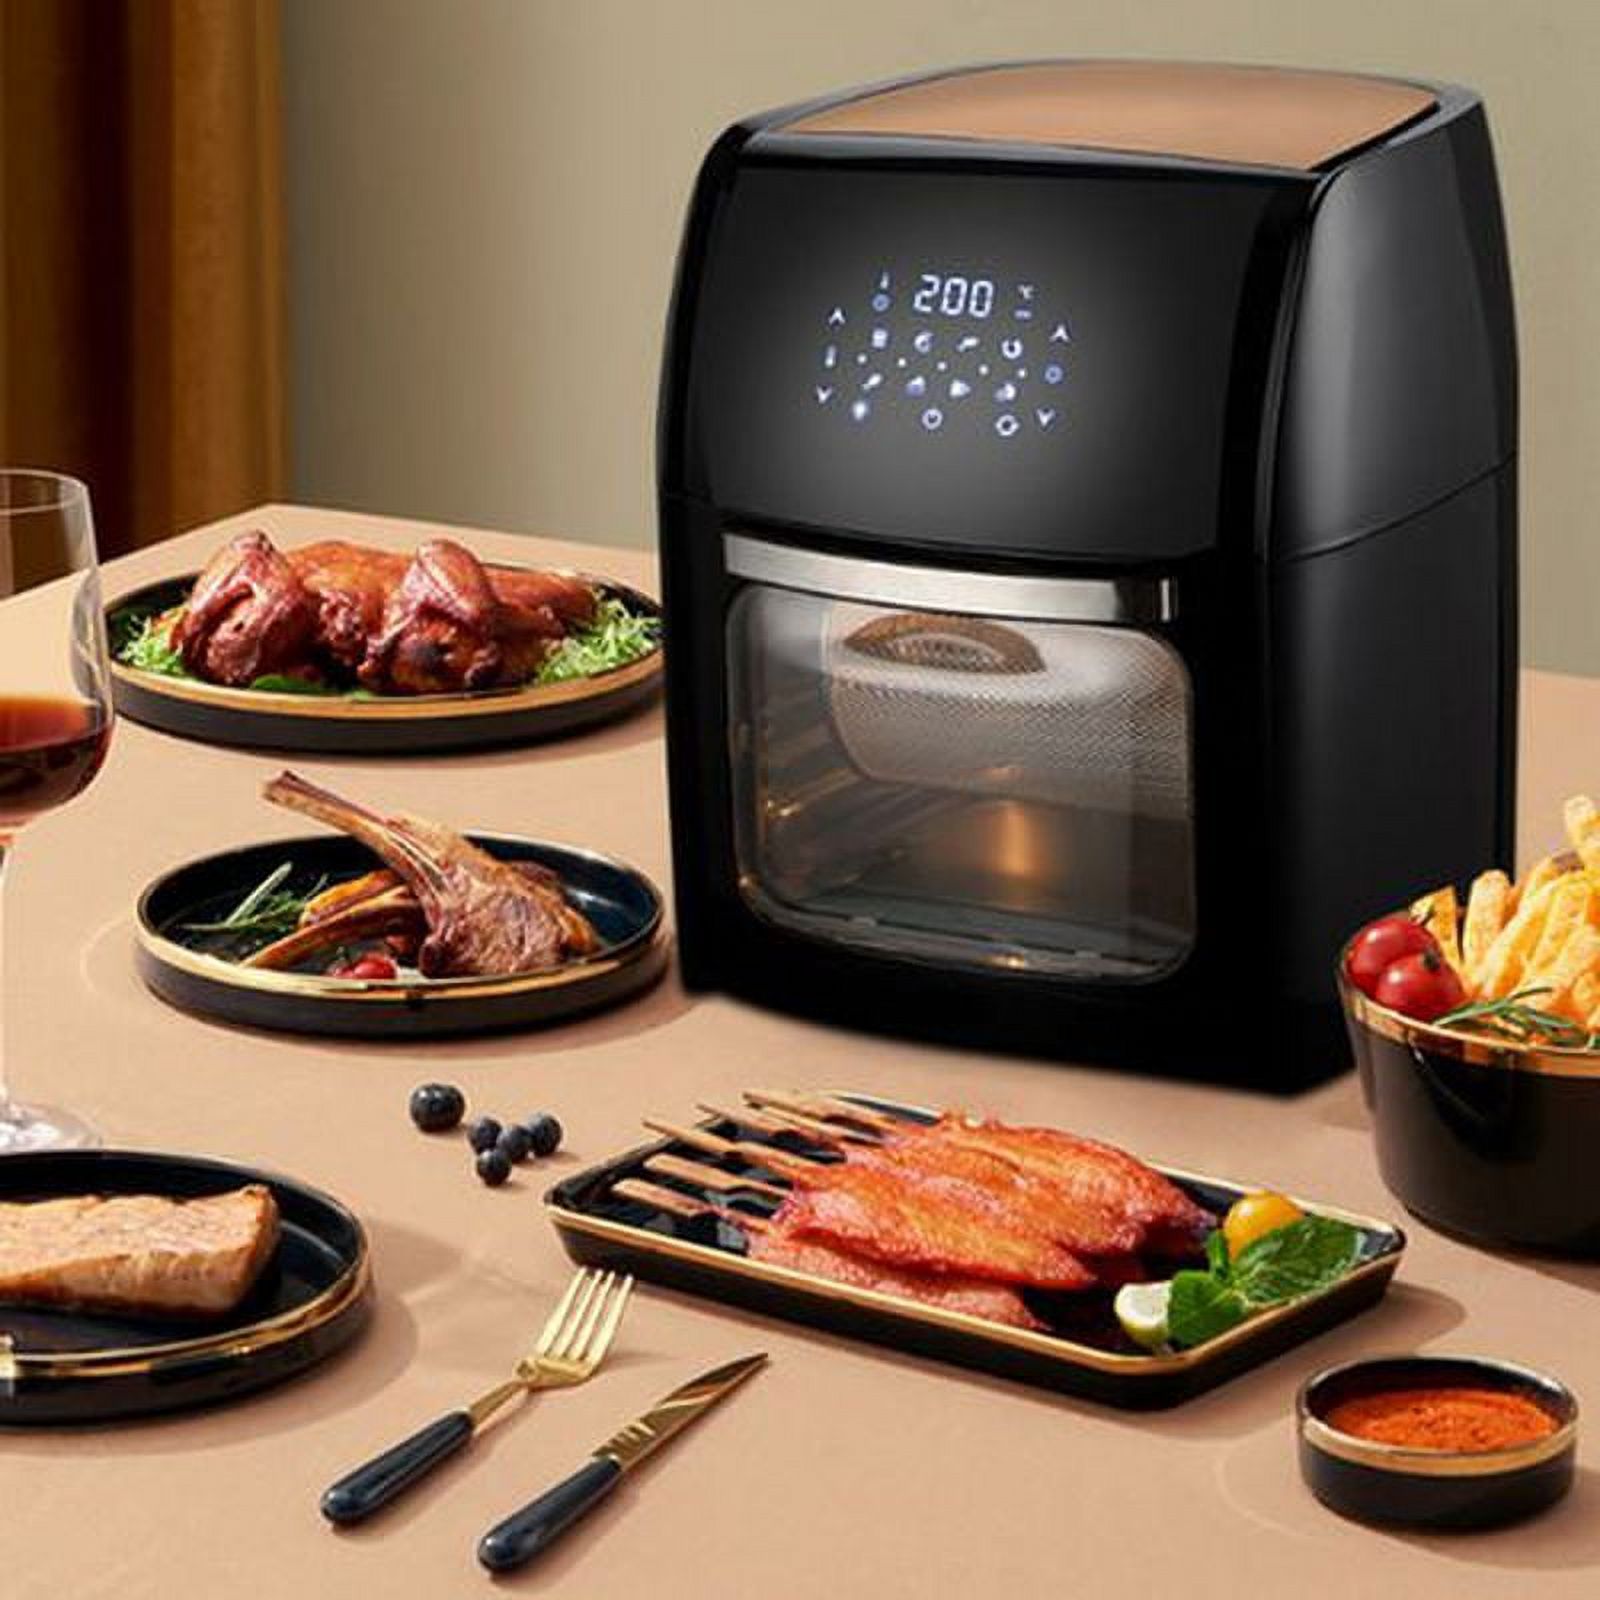 SOSPIRO 16.9qt Air Fryer Oven,1800W 8-in-1 Digital Large Air Fryer Countertop Oven, Rotisserie, Dehydrator and Baking Combo Oven - image 5 of 10